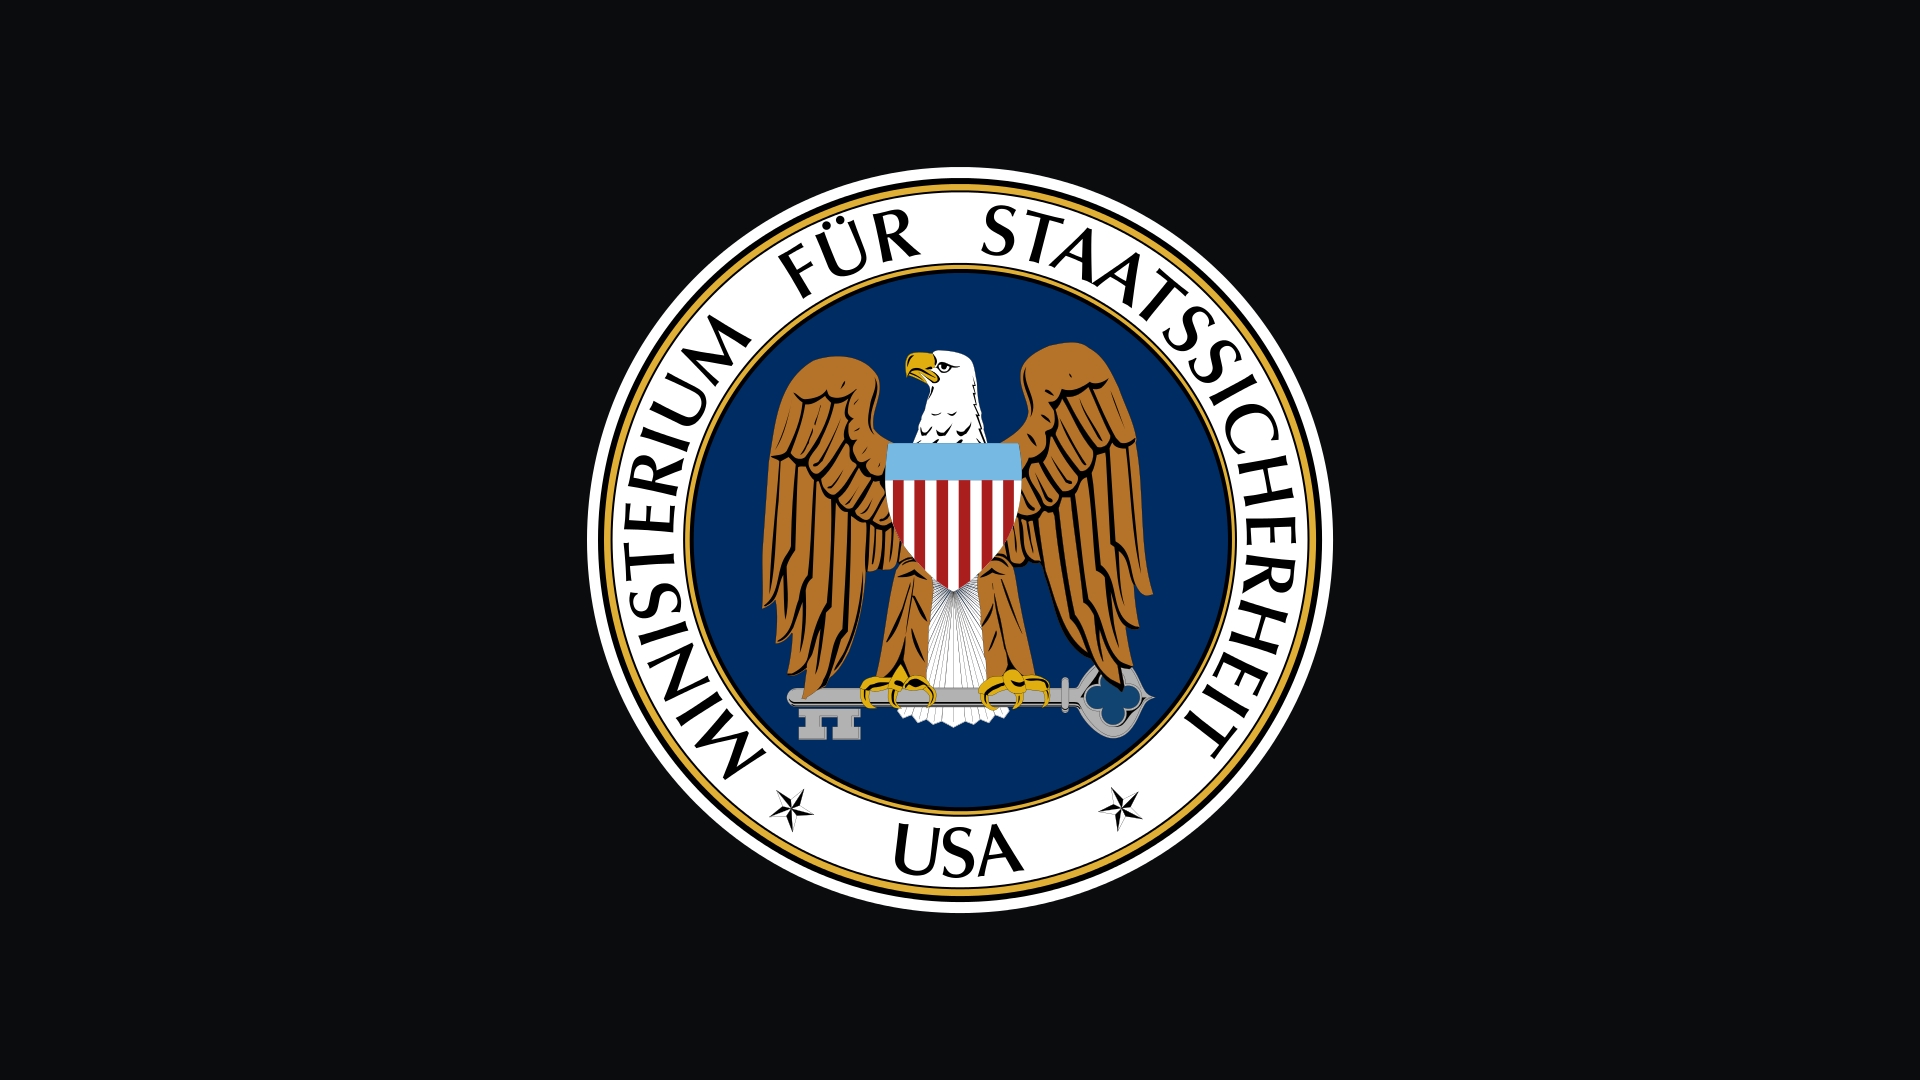 Free Download Nsa Stasi Wallpapers 1920x1080 For Your Desktop Mobile Tablet Explore 23 Nsa Wallpapers Nsa Wallpapers